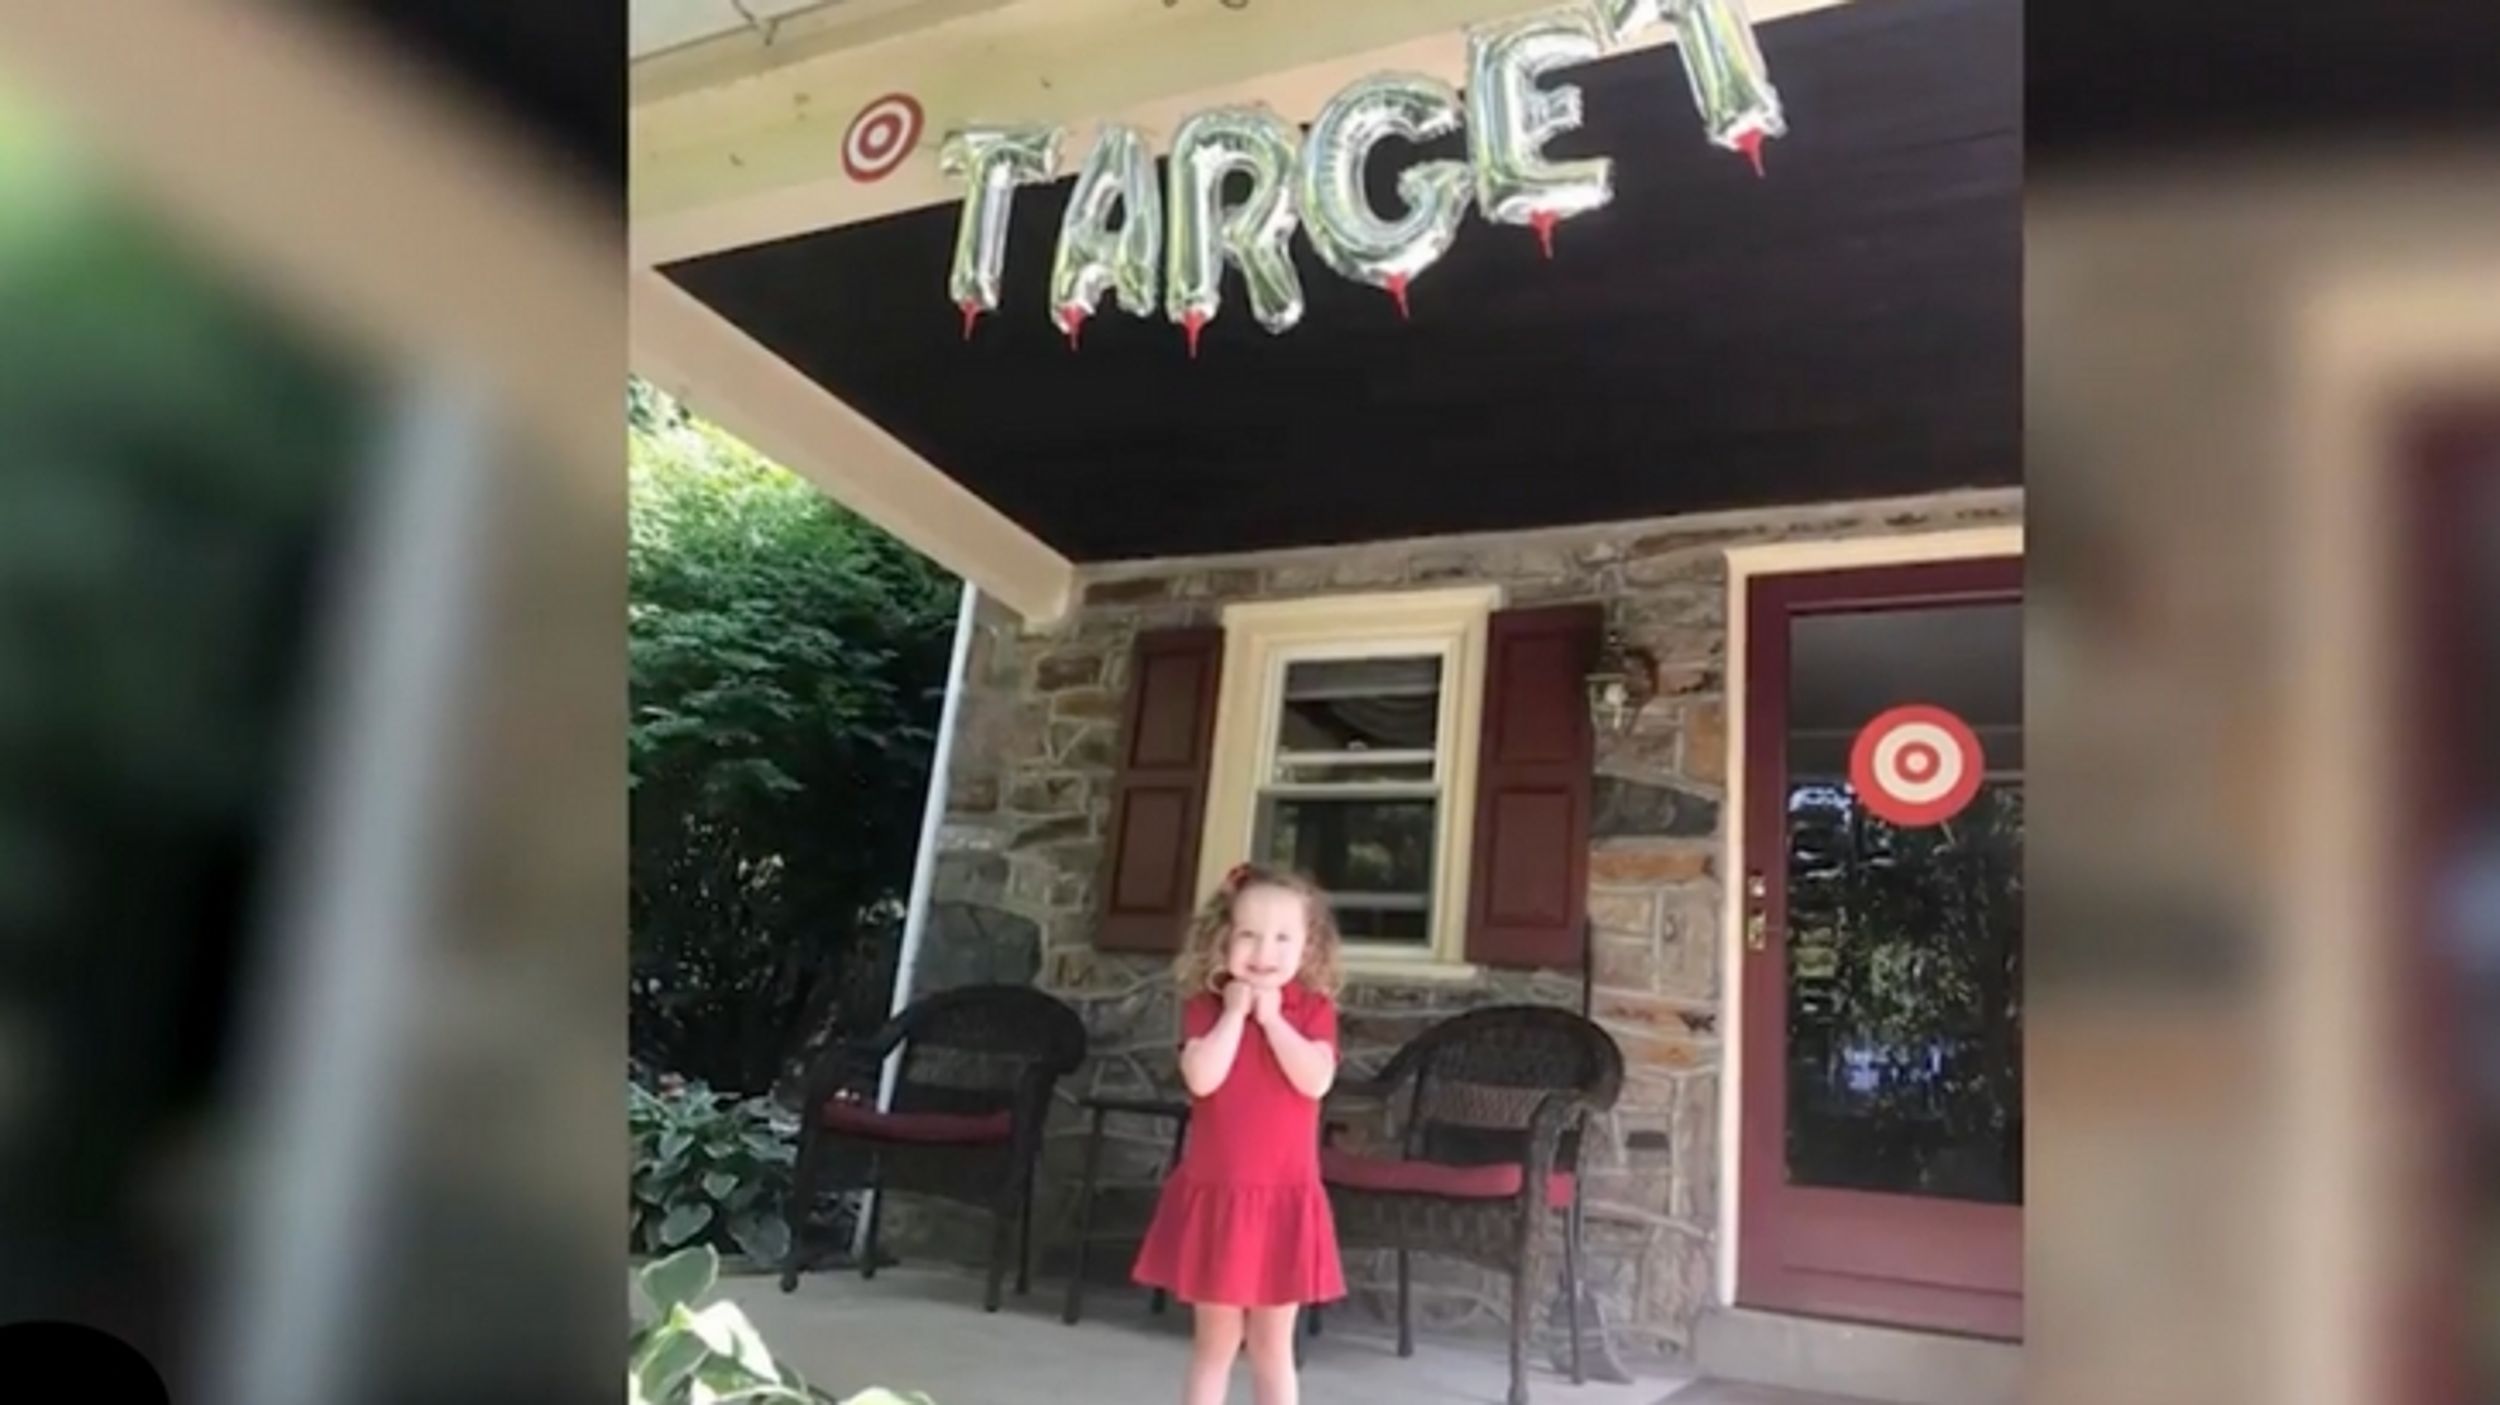 PHOTOS: Girl Gets the Target Store Themed Birthday Party of her Dreams